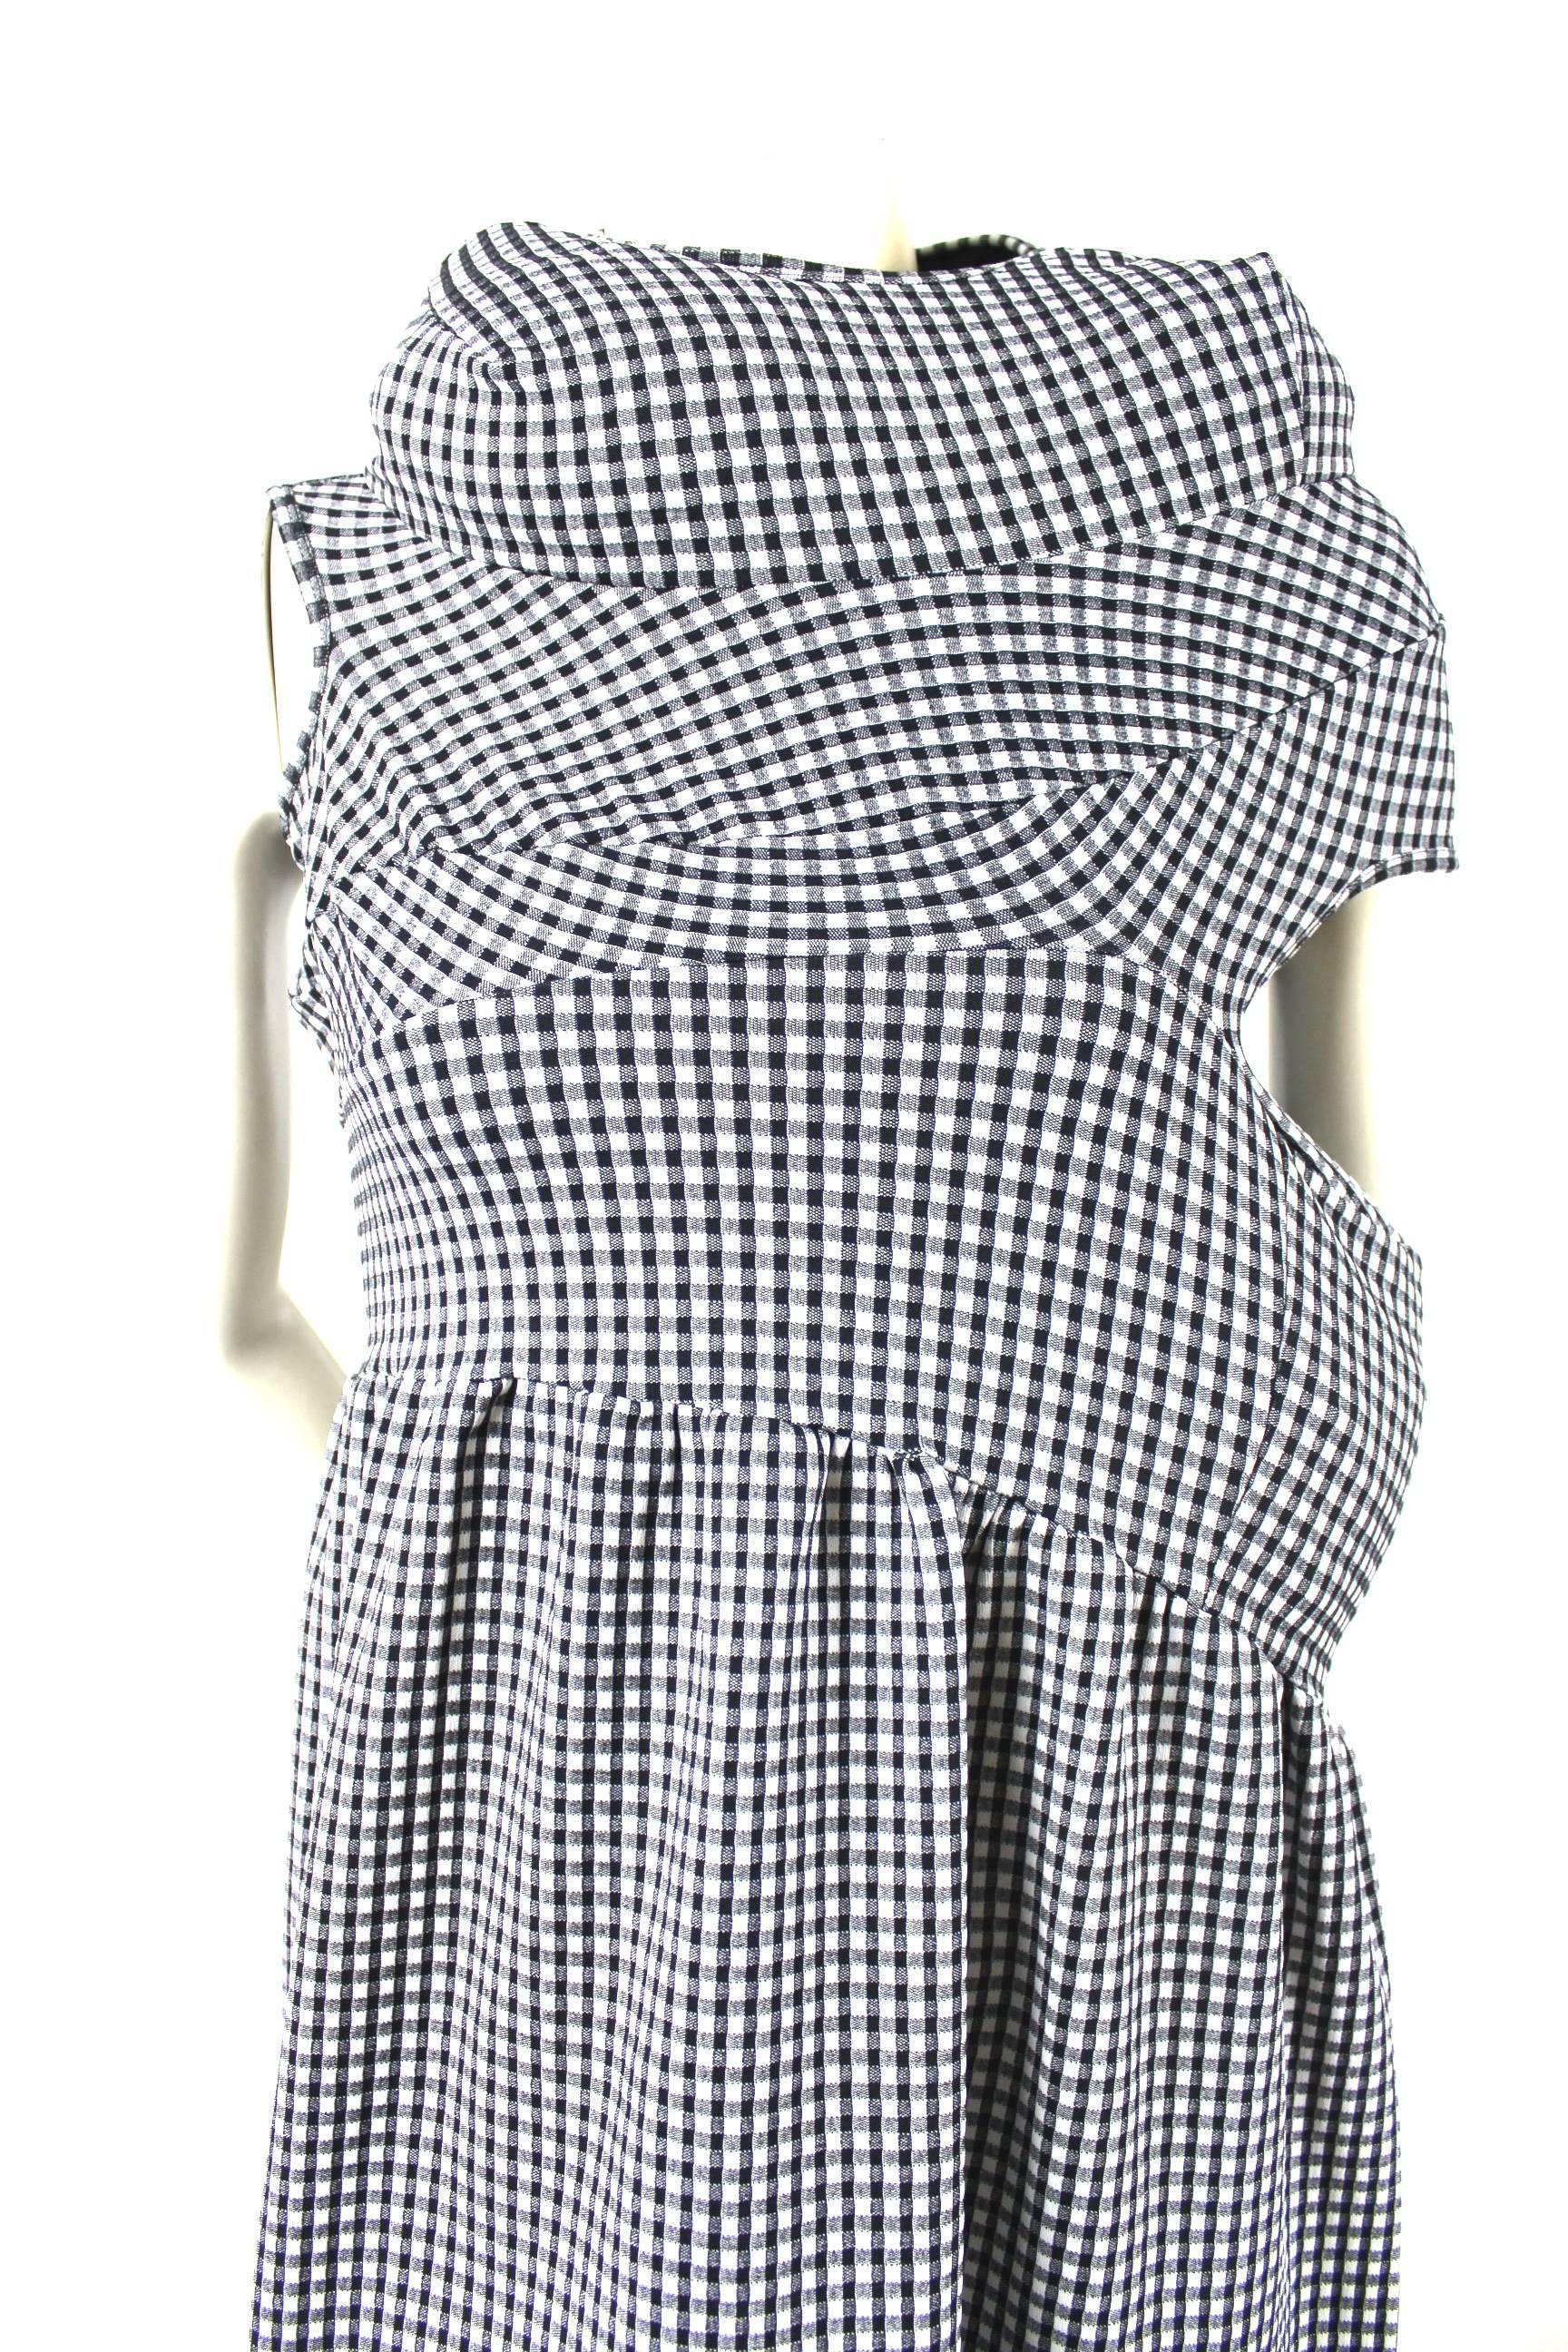 Comme des Garcons Body Meets Dress AD 1996
Robe de Chambre Label
Black and White Gingham Check
Dress is designed to be padded in various ways
